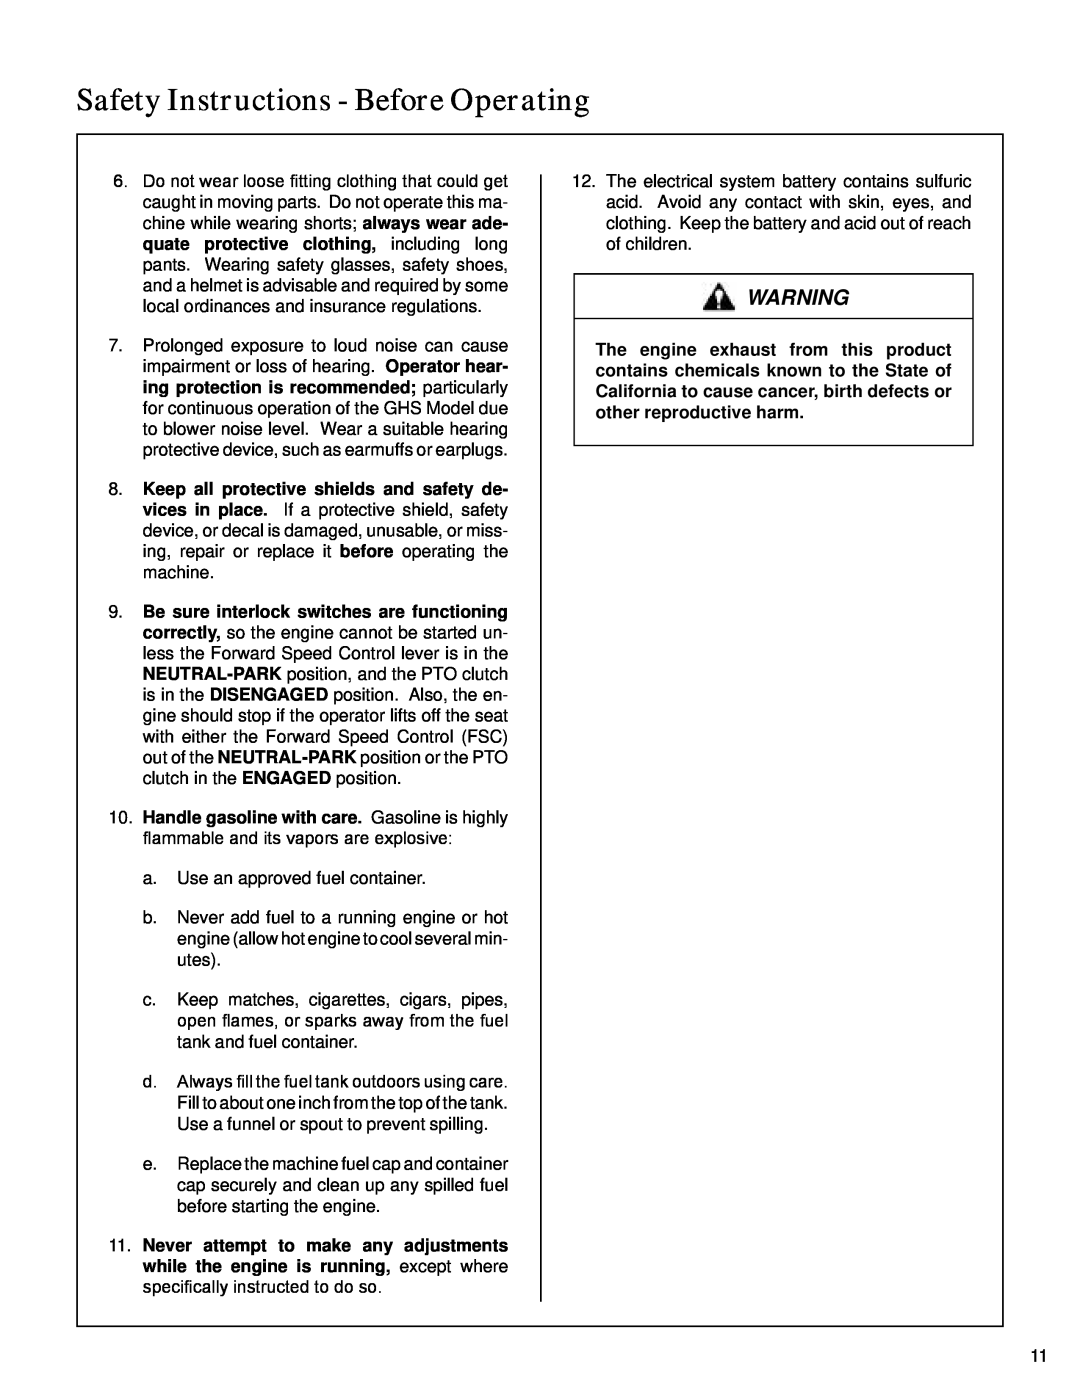 Walker S14 manual Safety Instructions - Before Operating, a.Use an approved fuel container 